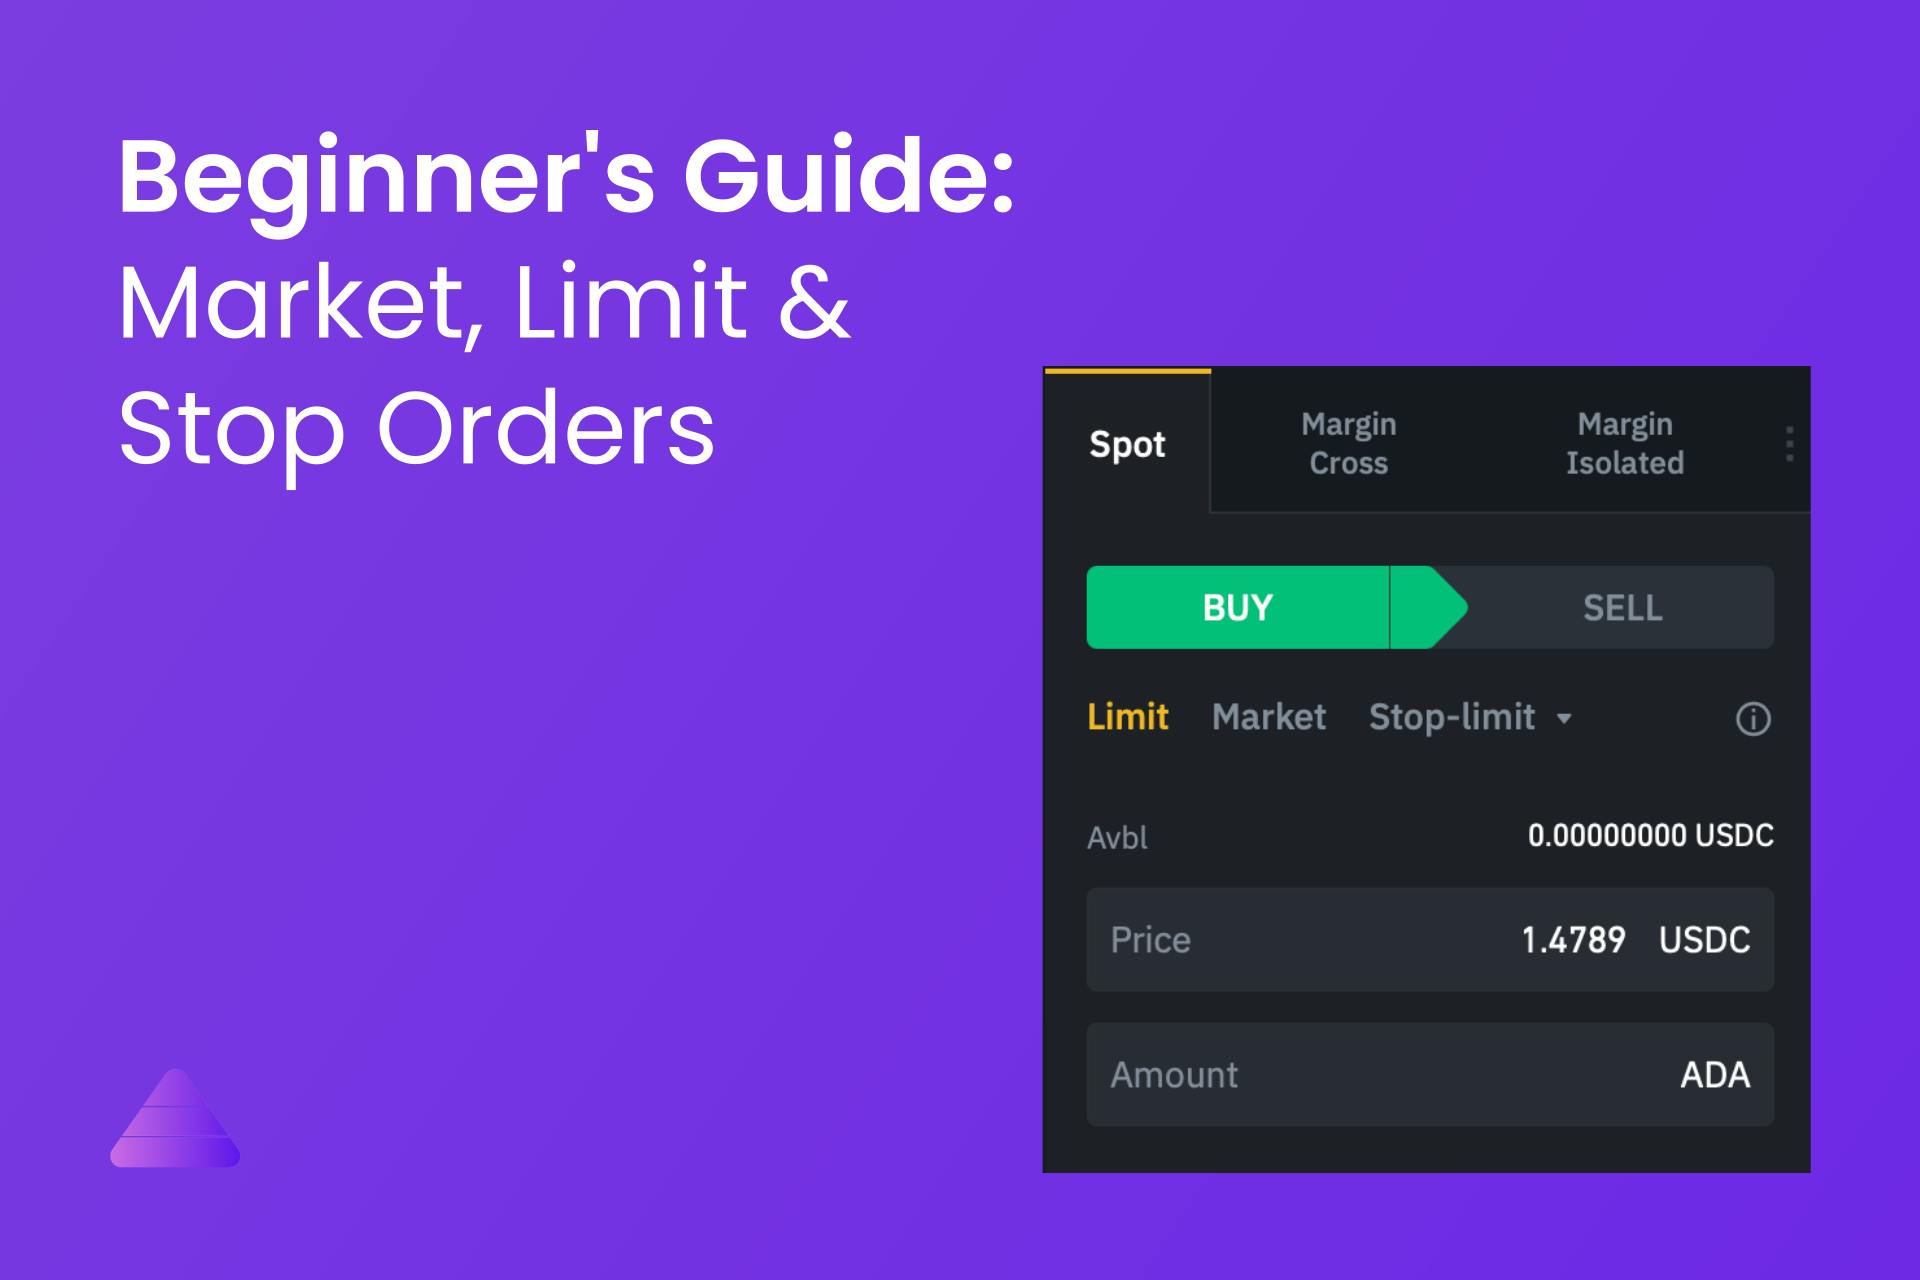 Market, limit and stop order types